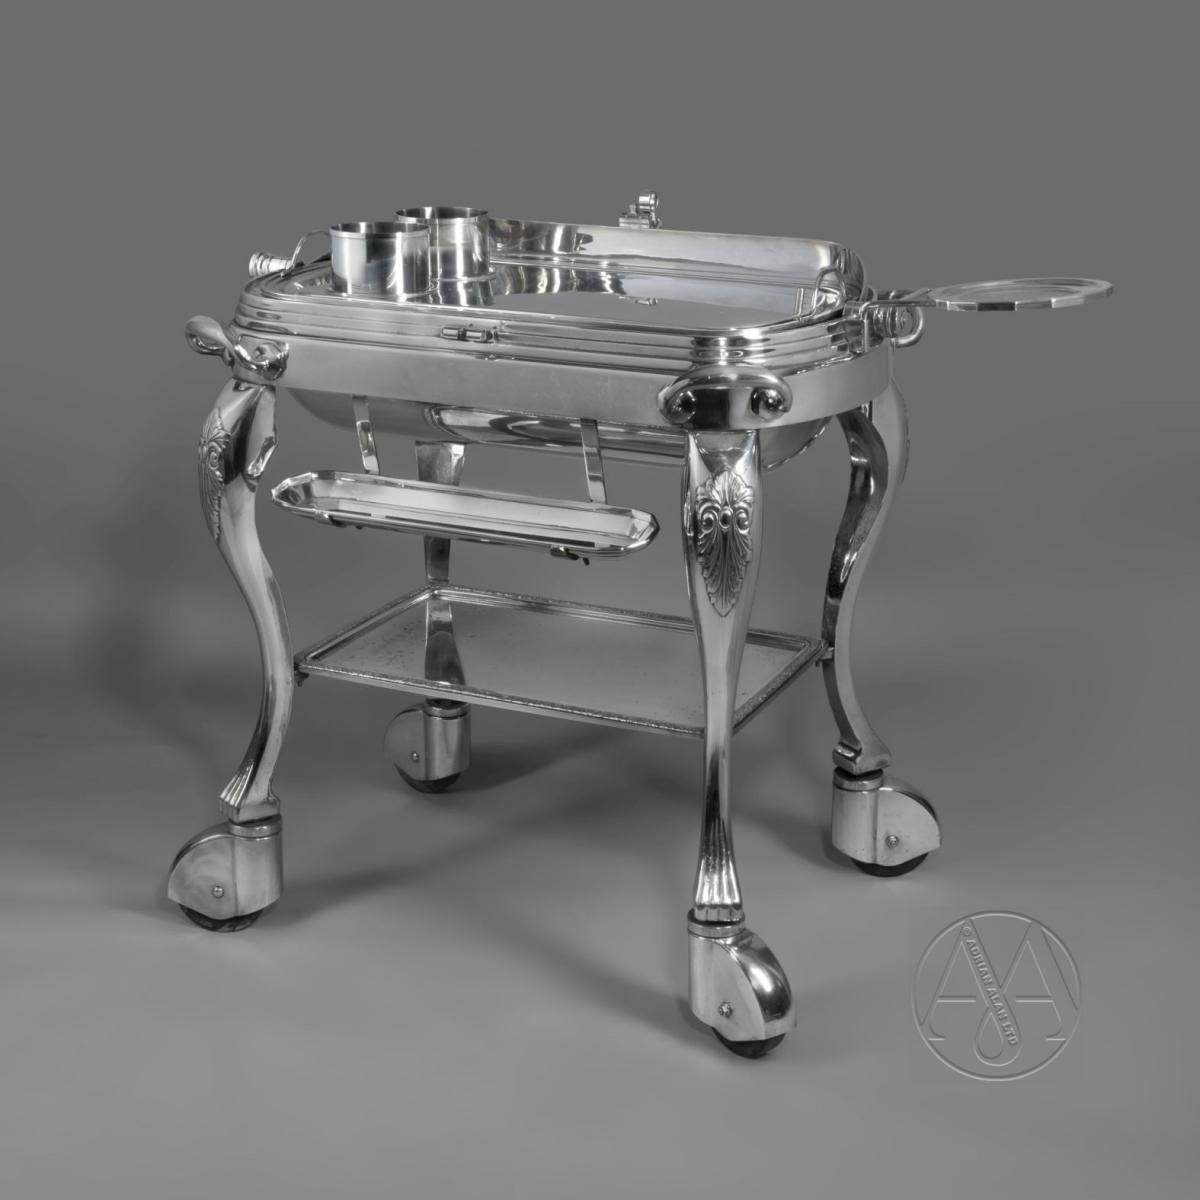 A Silver Plated Roast Beef Trolley Dating From Circa 1910